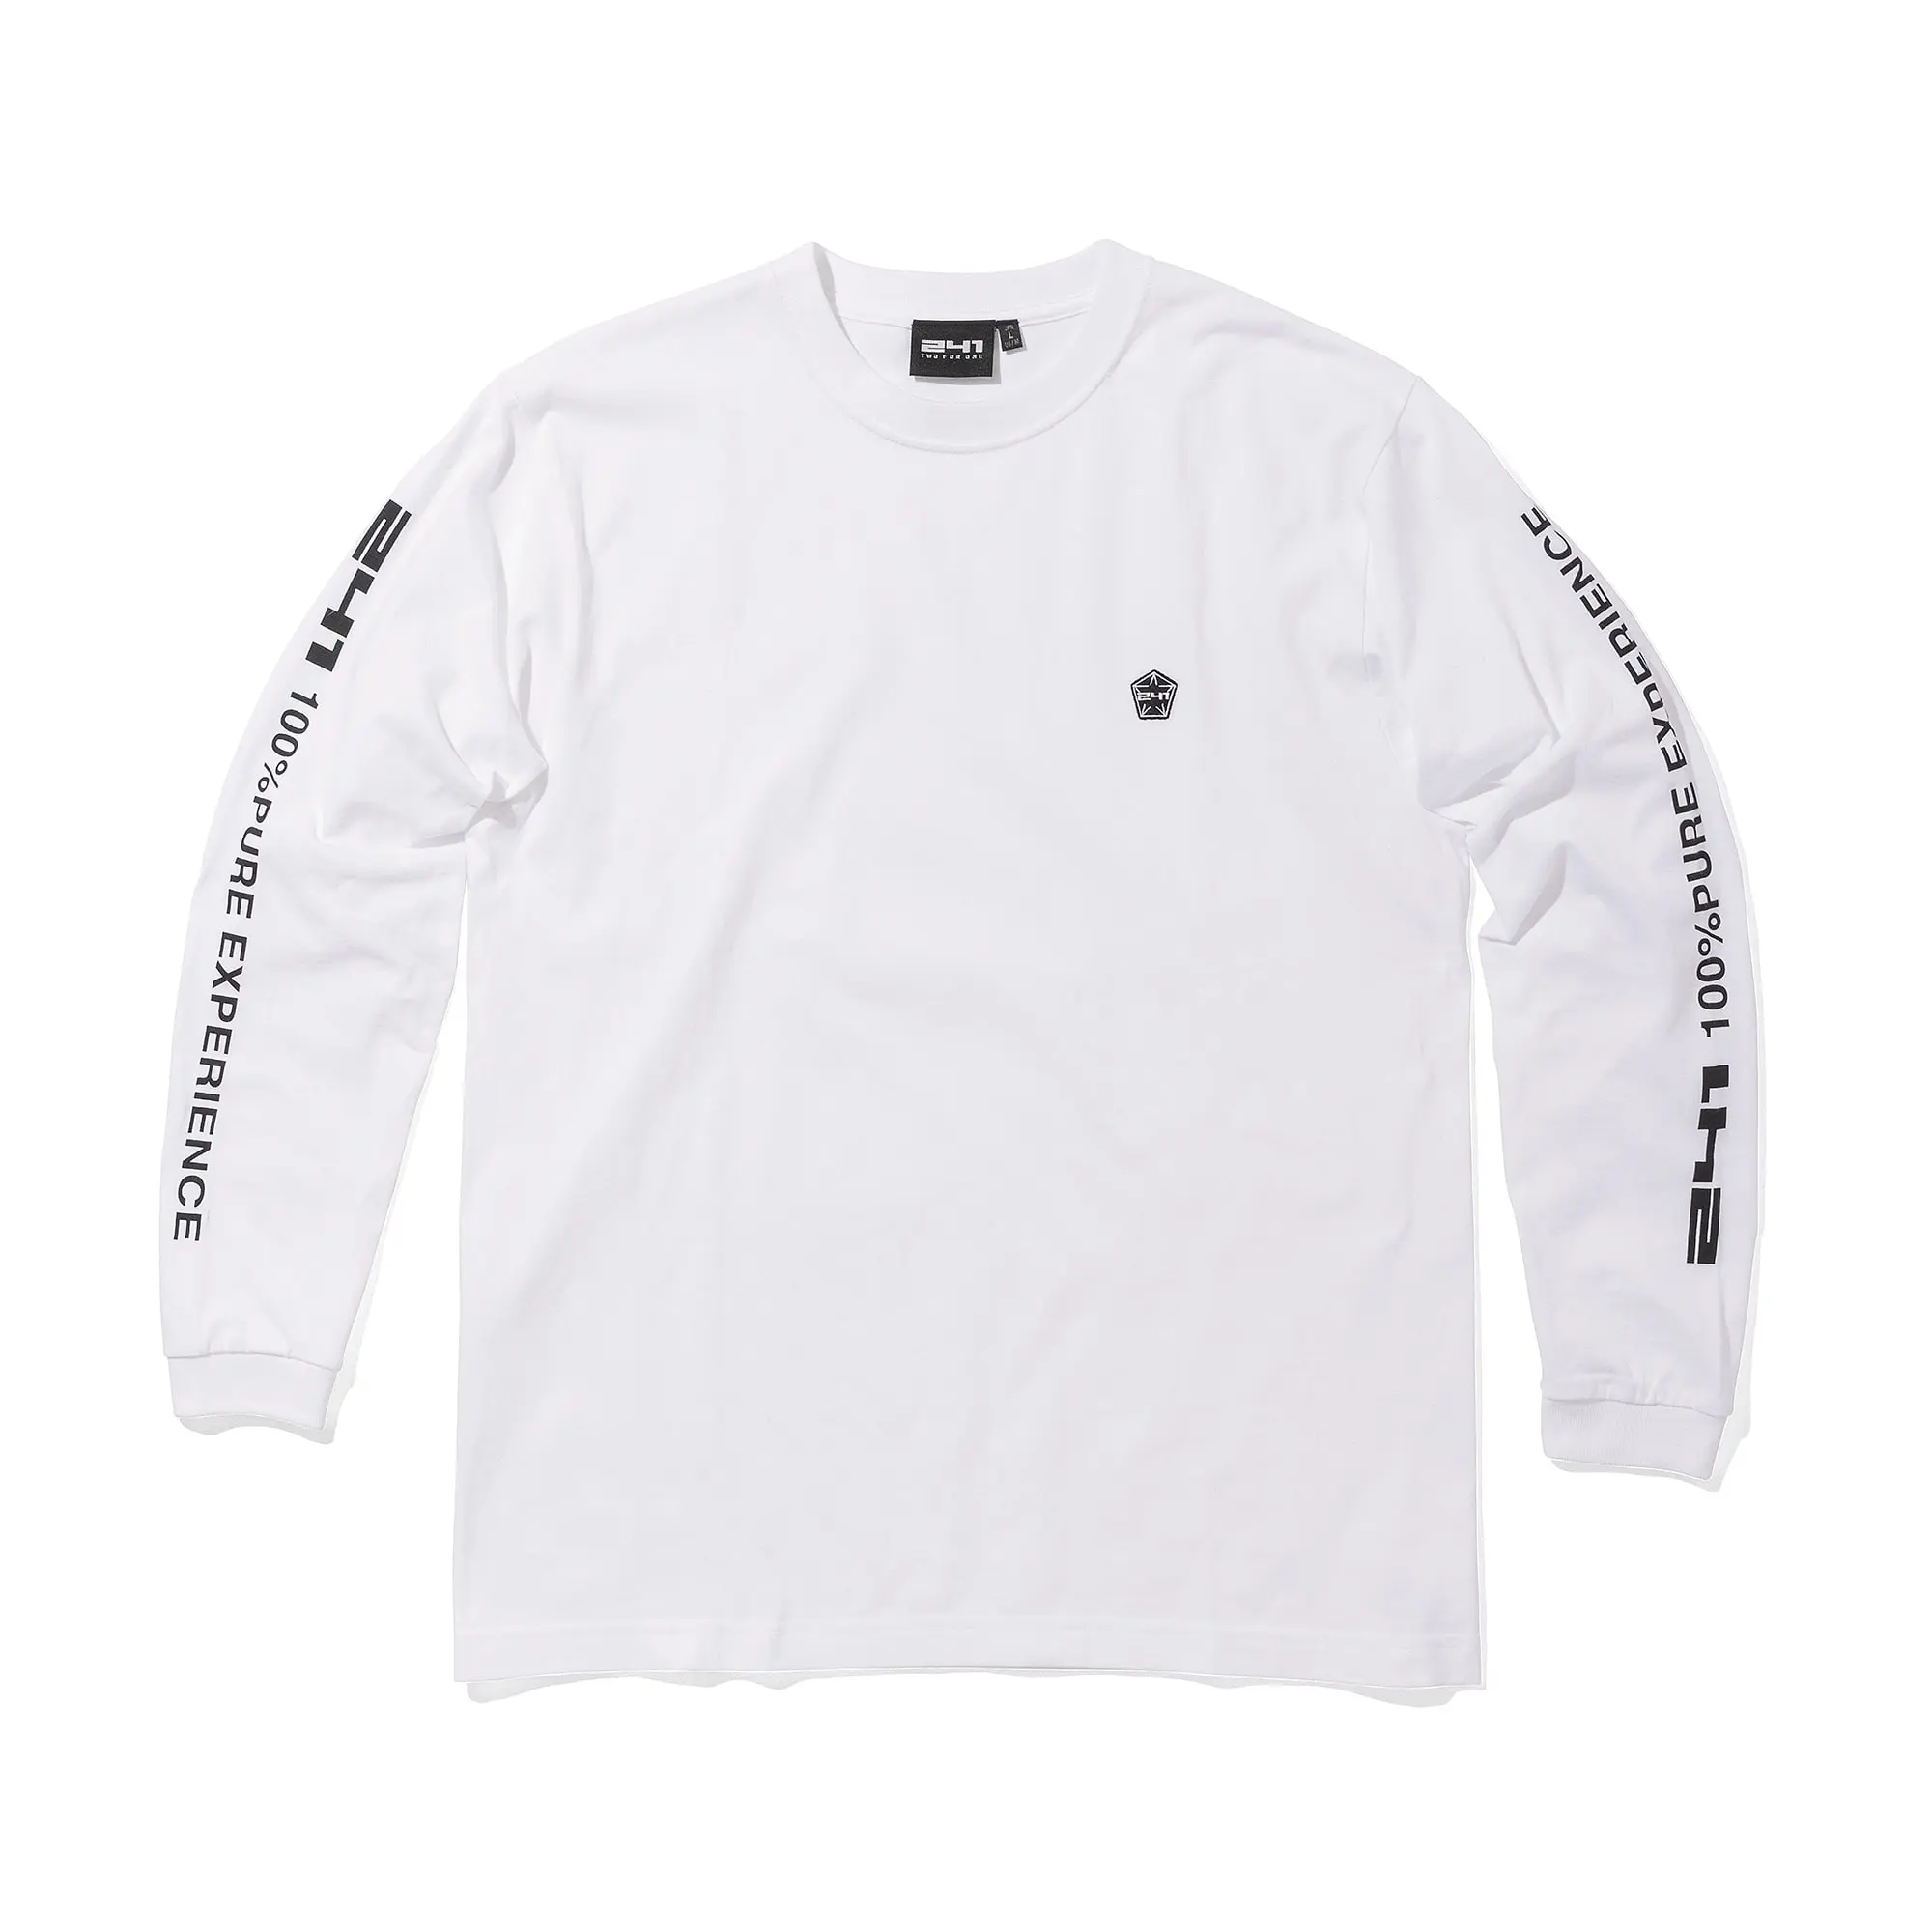 AREA241-PENTAGON LS TEE
COLOR: WHITE
¥6,600（tax incl.） MB4303